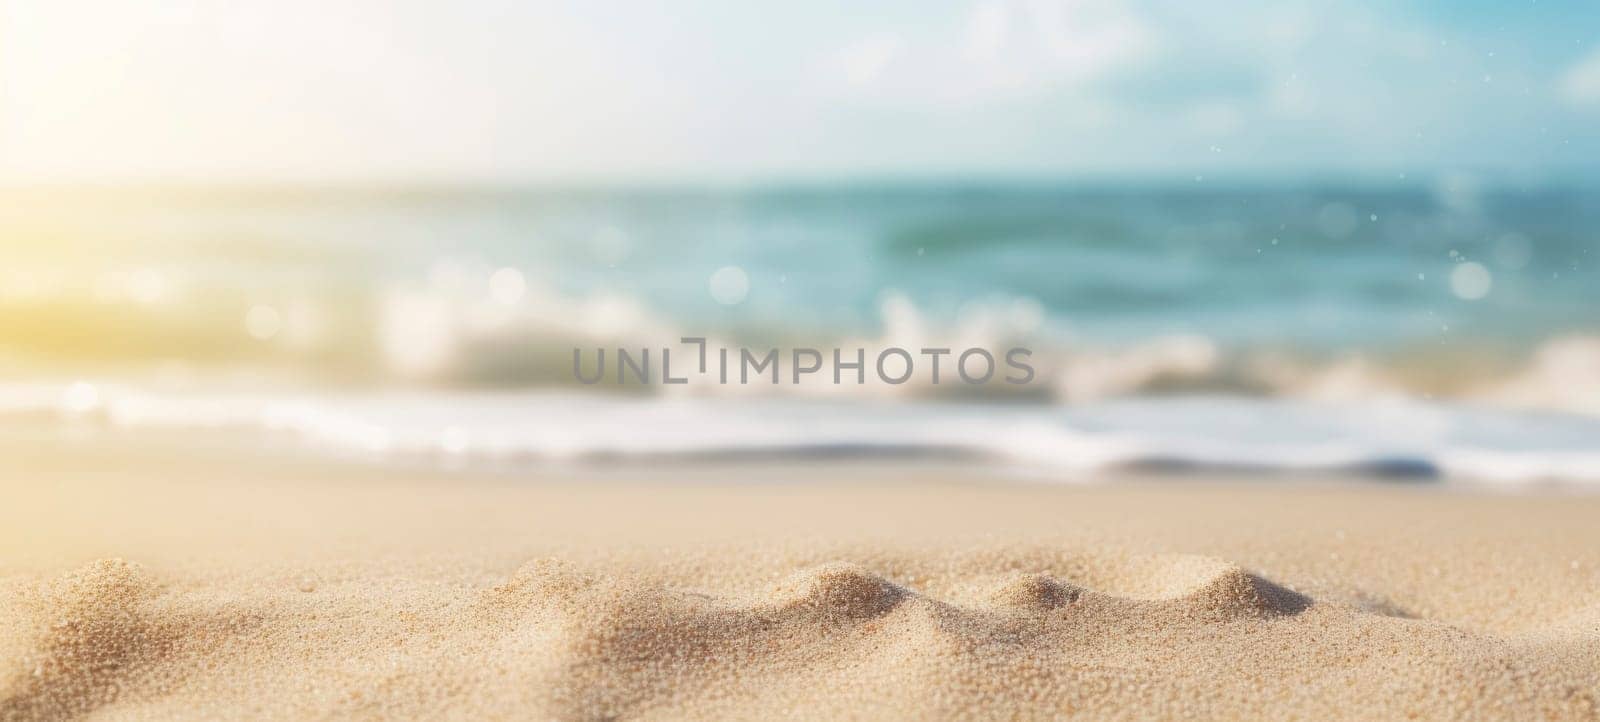 Close-up of a tranquil sandy beach with a soft-focus ocean in the background and particles glistening.